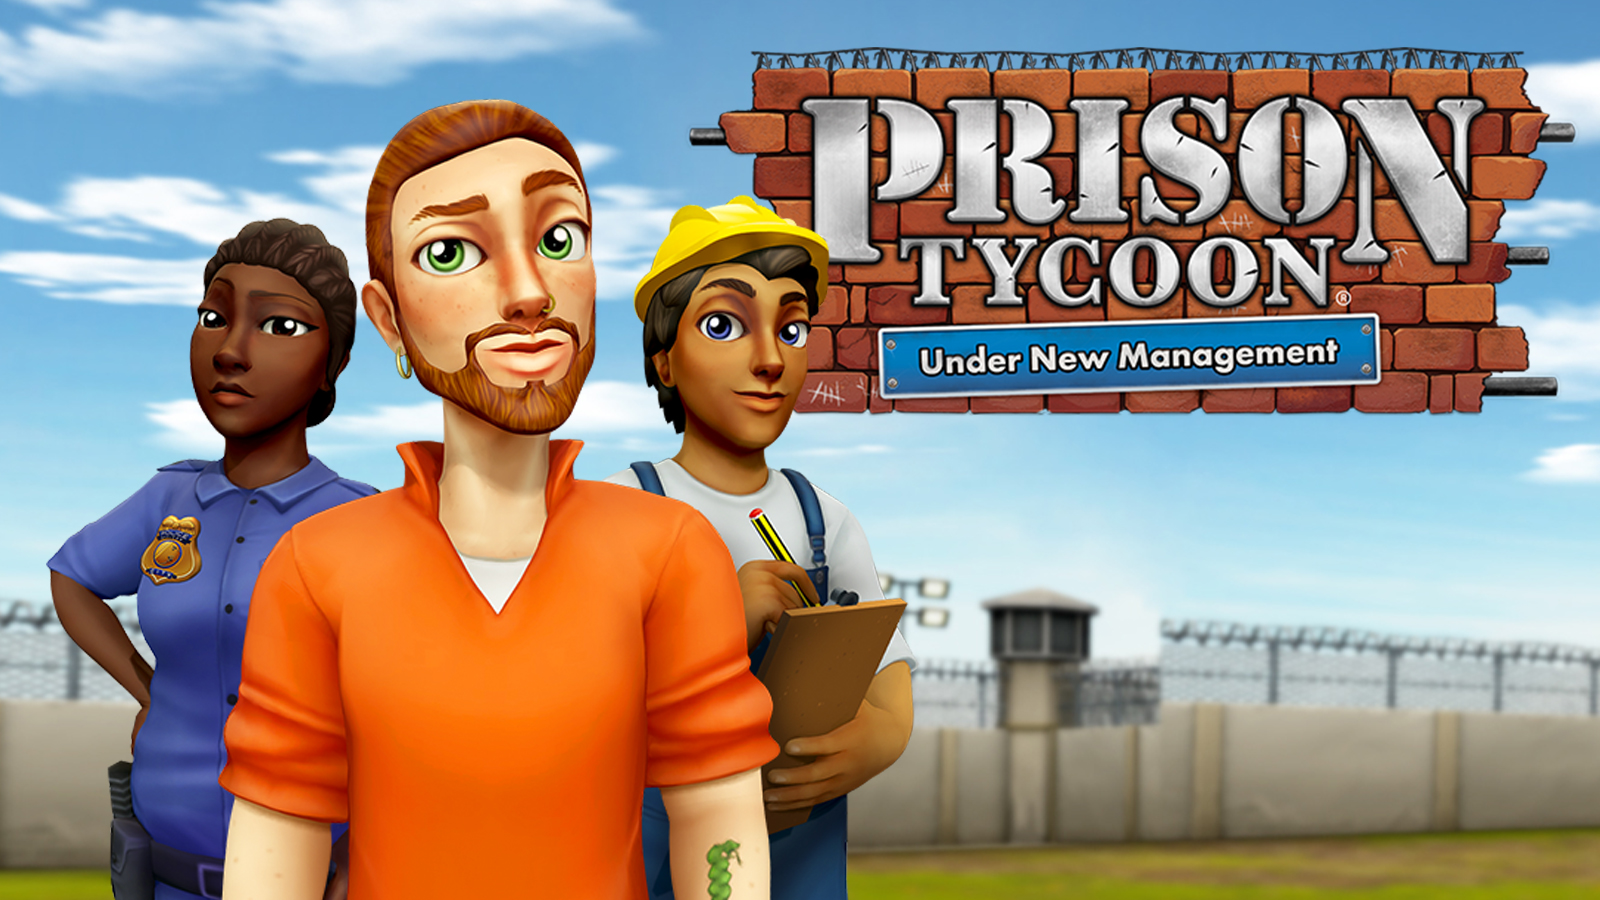 prison tycoon 4